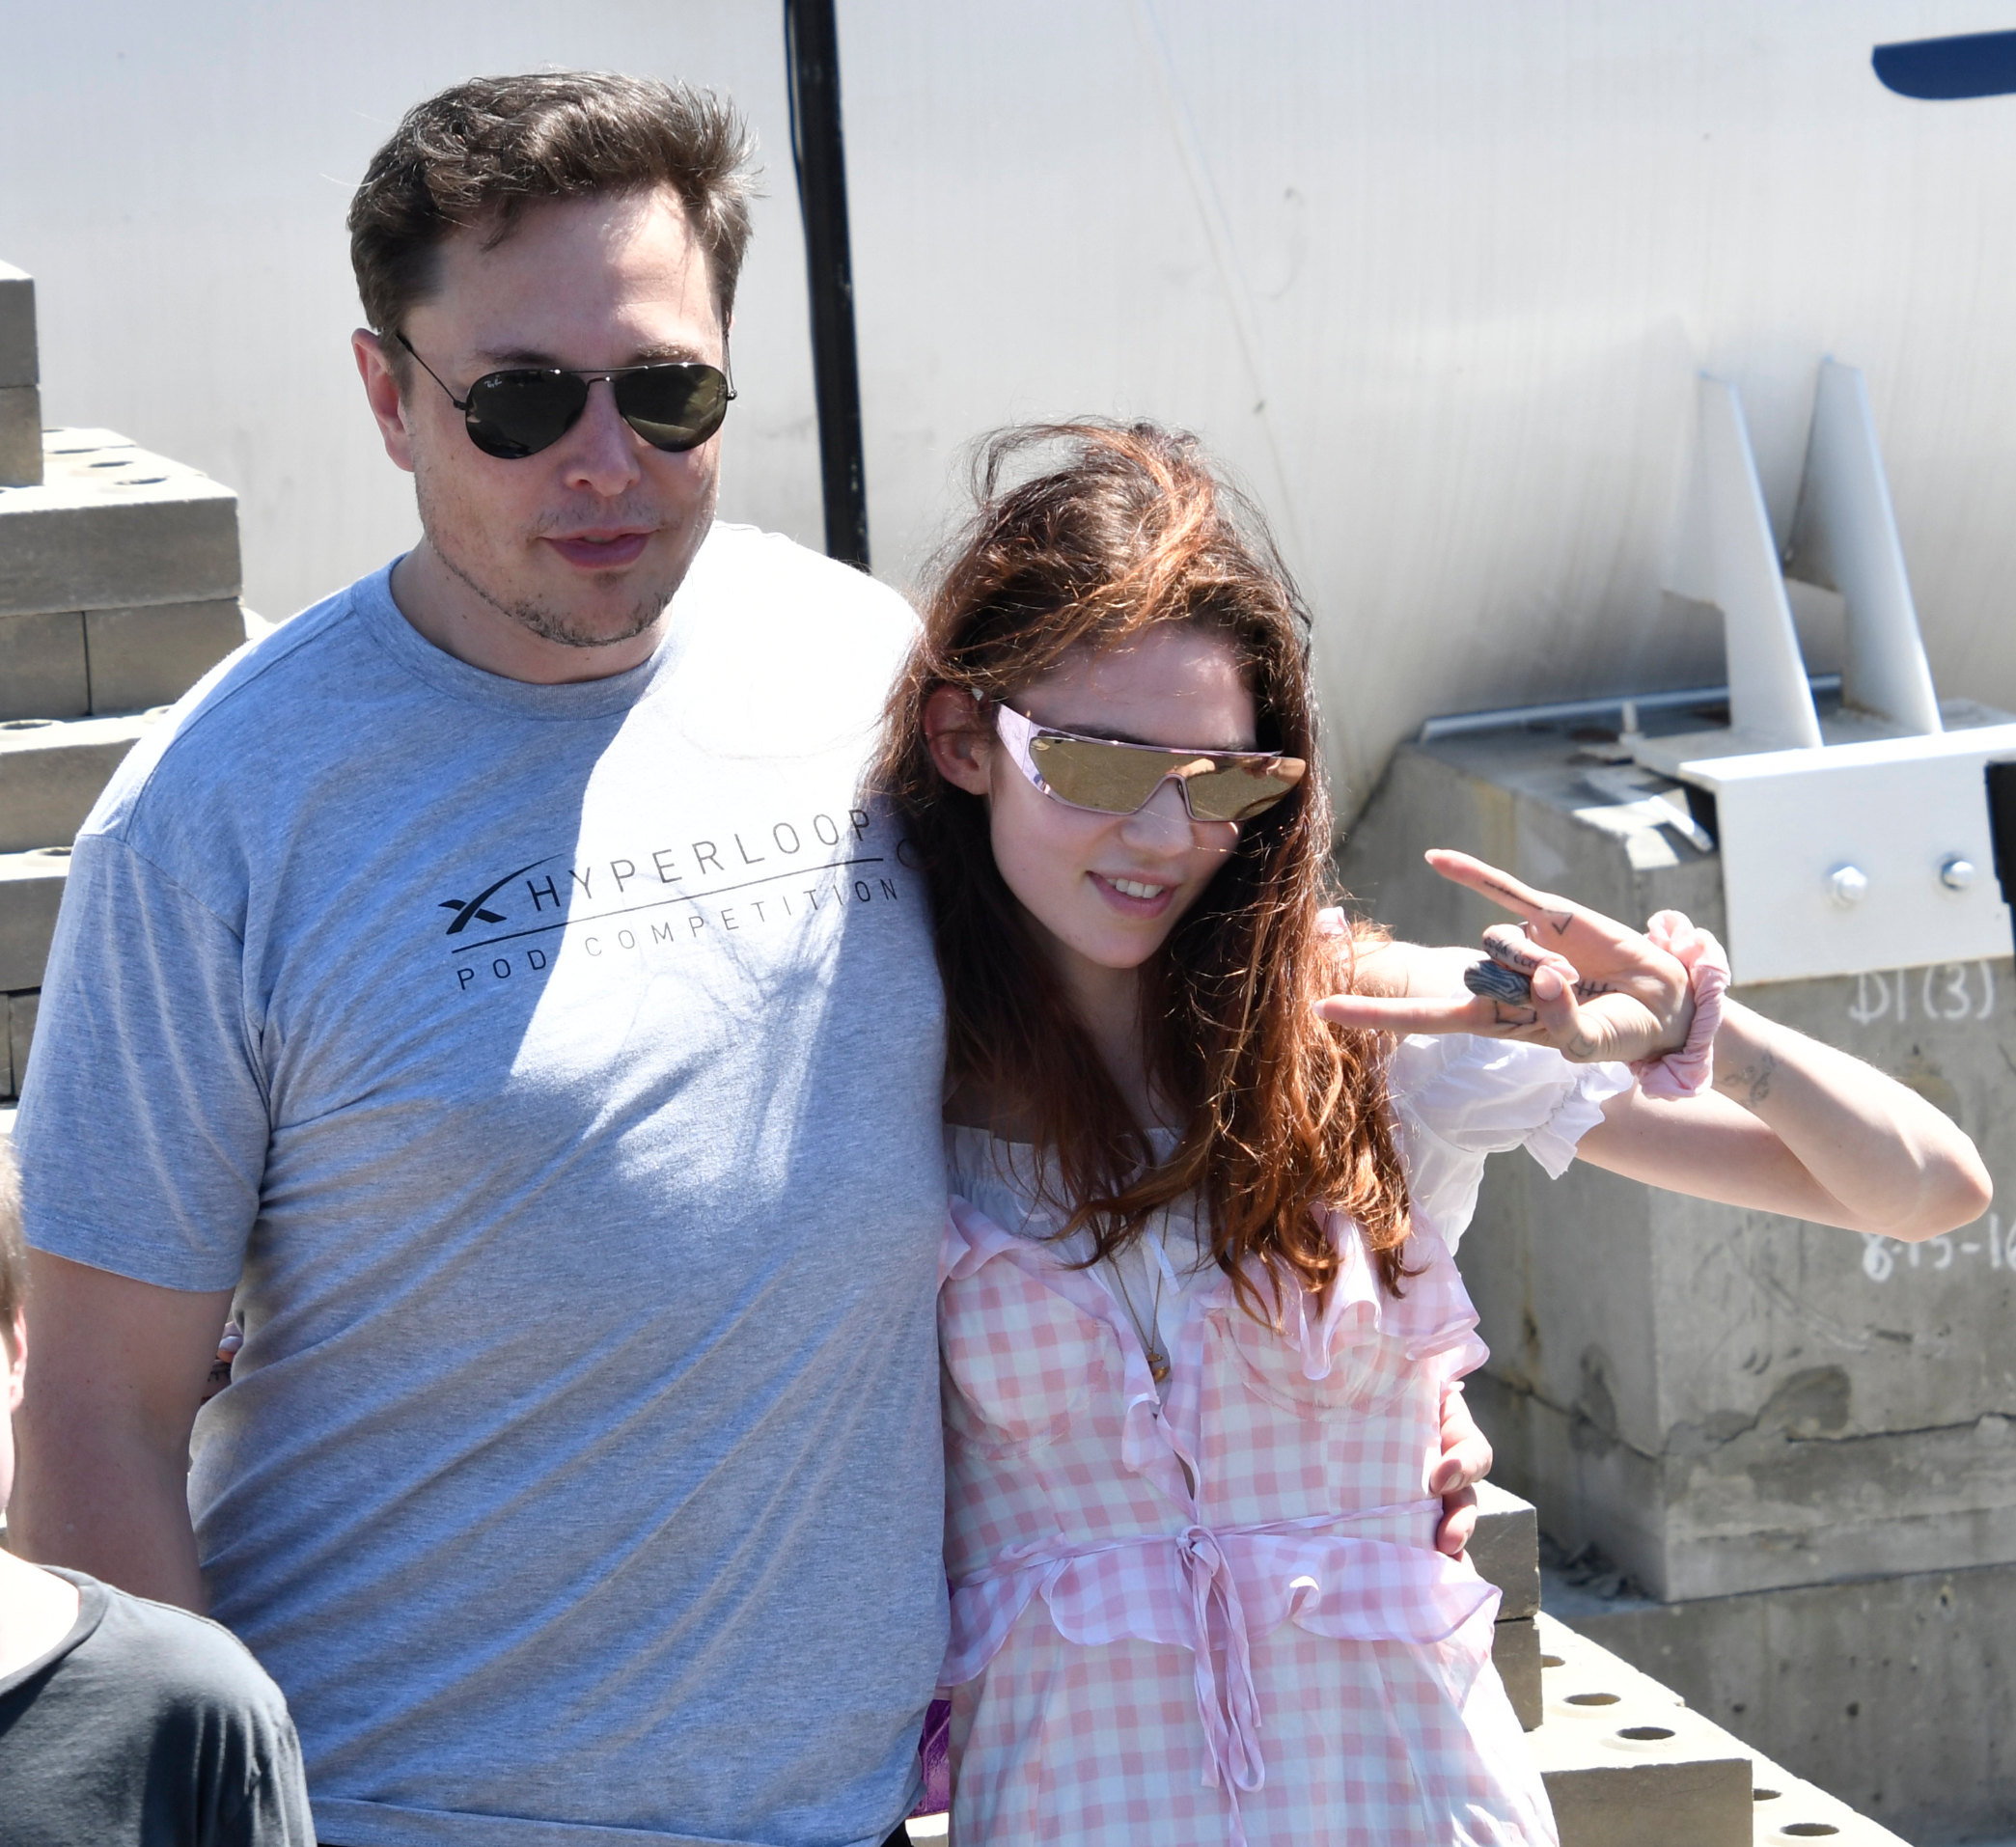 July 22, 2018 - Hawthorne, California, U.S. - SpaceX CEO ELON MUSK with his new girlfriend, UK singer singer GRIMES, as the last of 4 teams of students comprised of over 600 competitors from more than 40 countries around the world compete to showcase their pods at SpaceX's third Hyperloop Pod Competition Sunday. The winning team was WARR Hyperloop, as they hit speeds of 284 mph today., Image: 378968586, License: Rights-managed, Restrictions: , Model Release: no, Credit line: Gene Blevins / Zuma Press / Profimedia